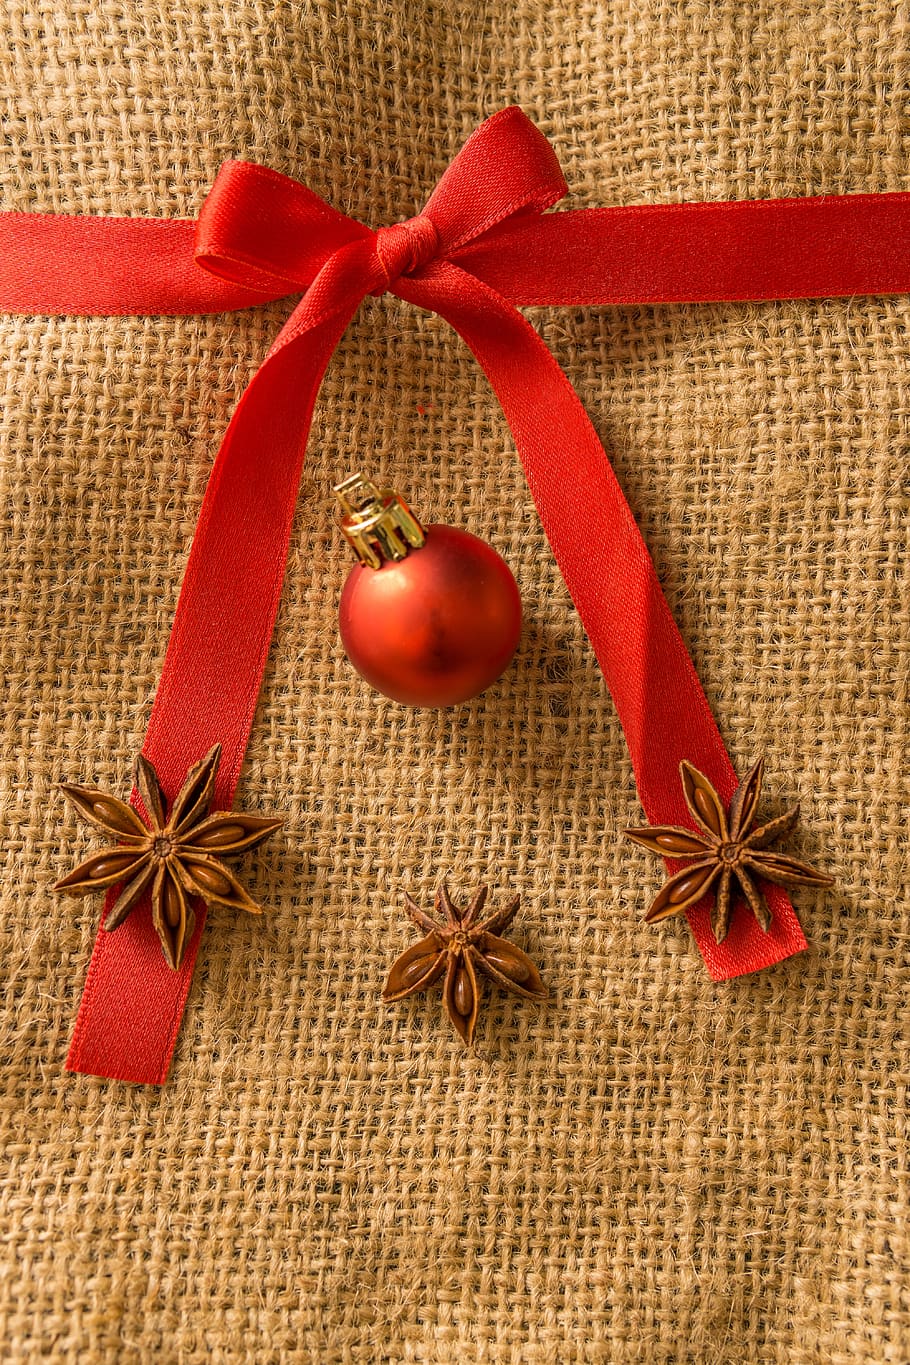 christmas, star anise, loop, red, ball, yurt fabric, still life, advent, anise, deco